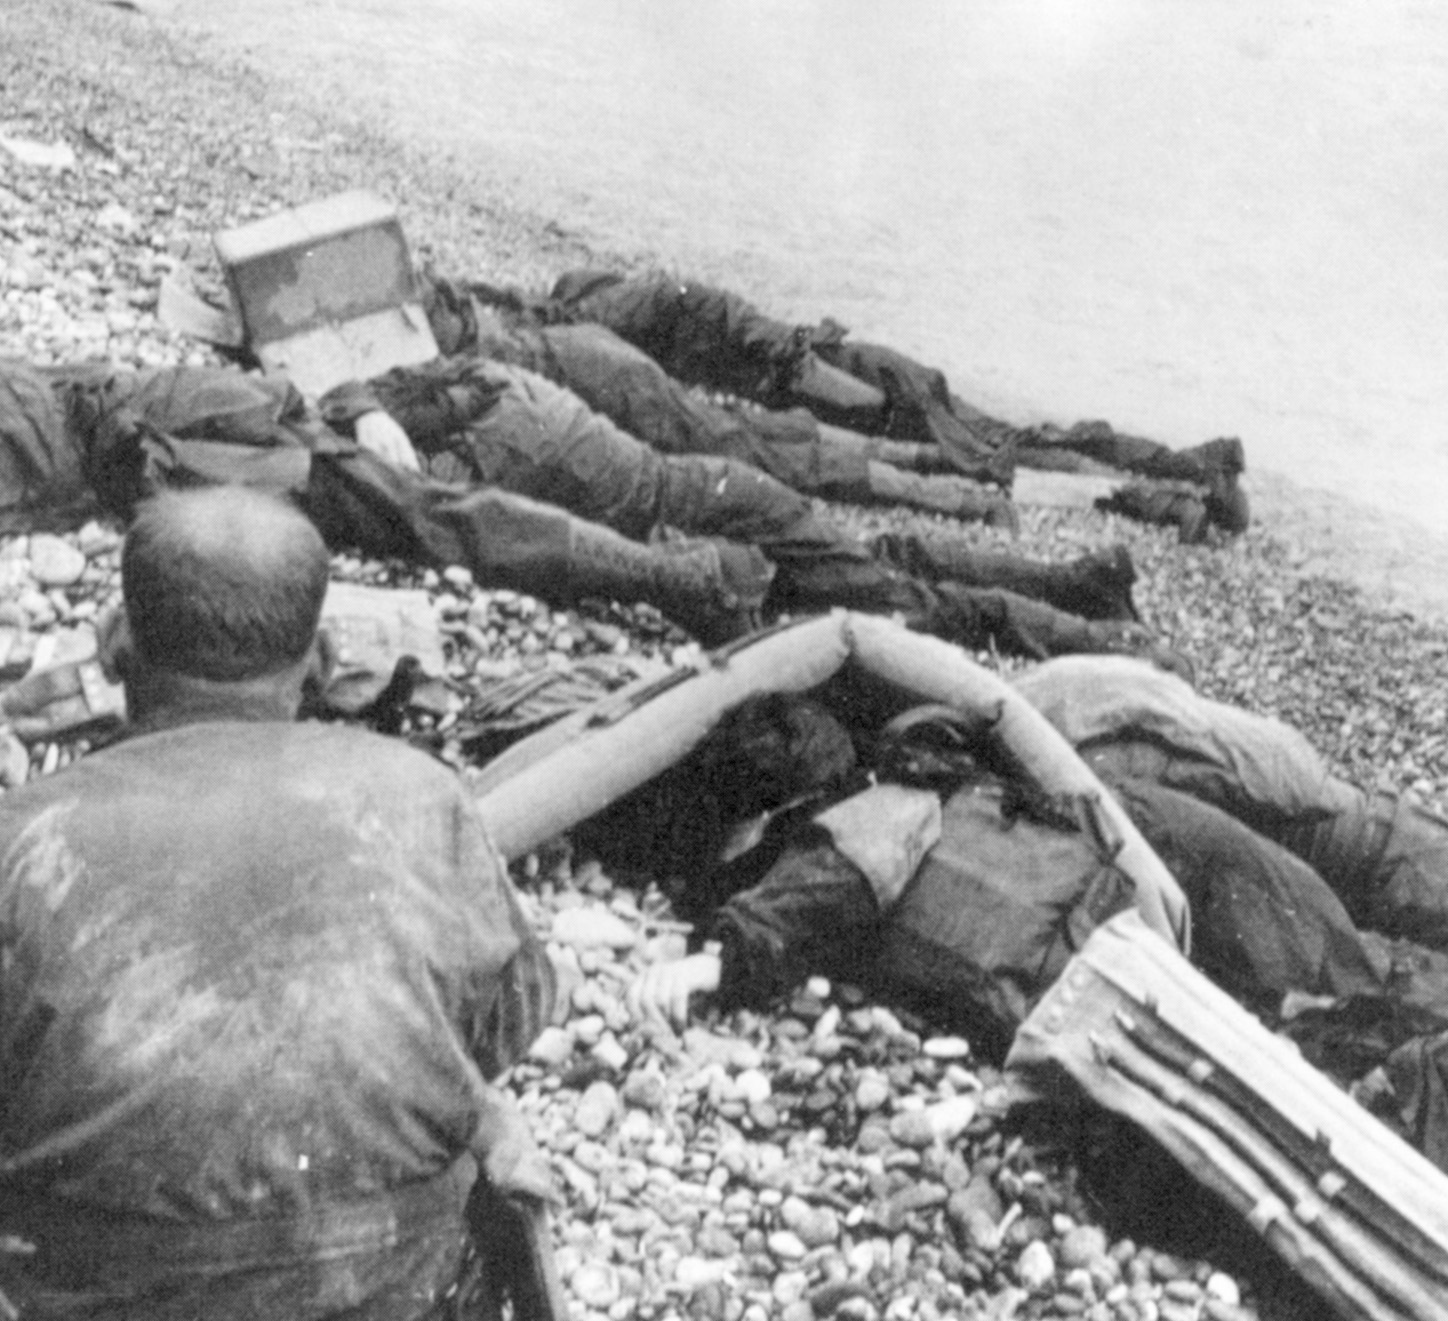 Most of the D-day casualties occurred during the first two hours of the beach landings; on Omaha Beach alone, 2,400 men were killed, wounded, or reported missing.